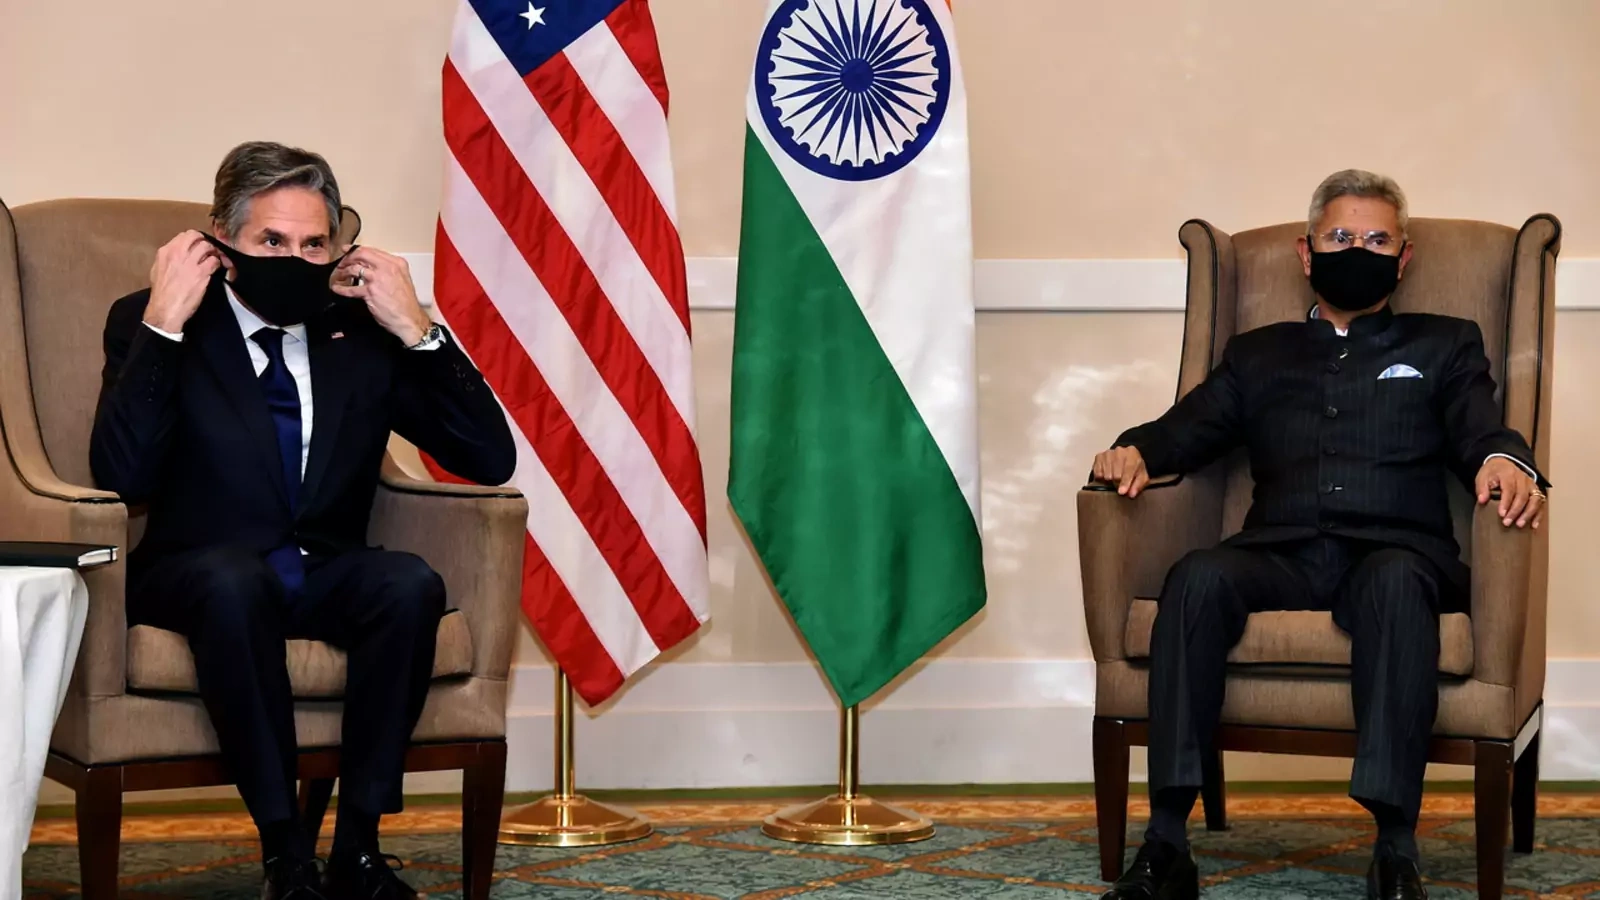 U.S. Secretary of State Blinken meets with India's Foreign Minister Jaishankar in Rome